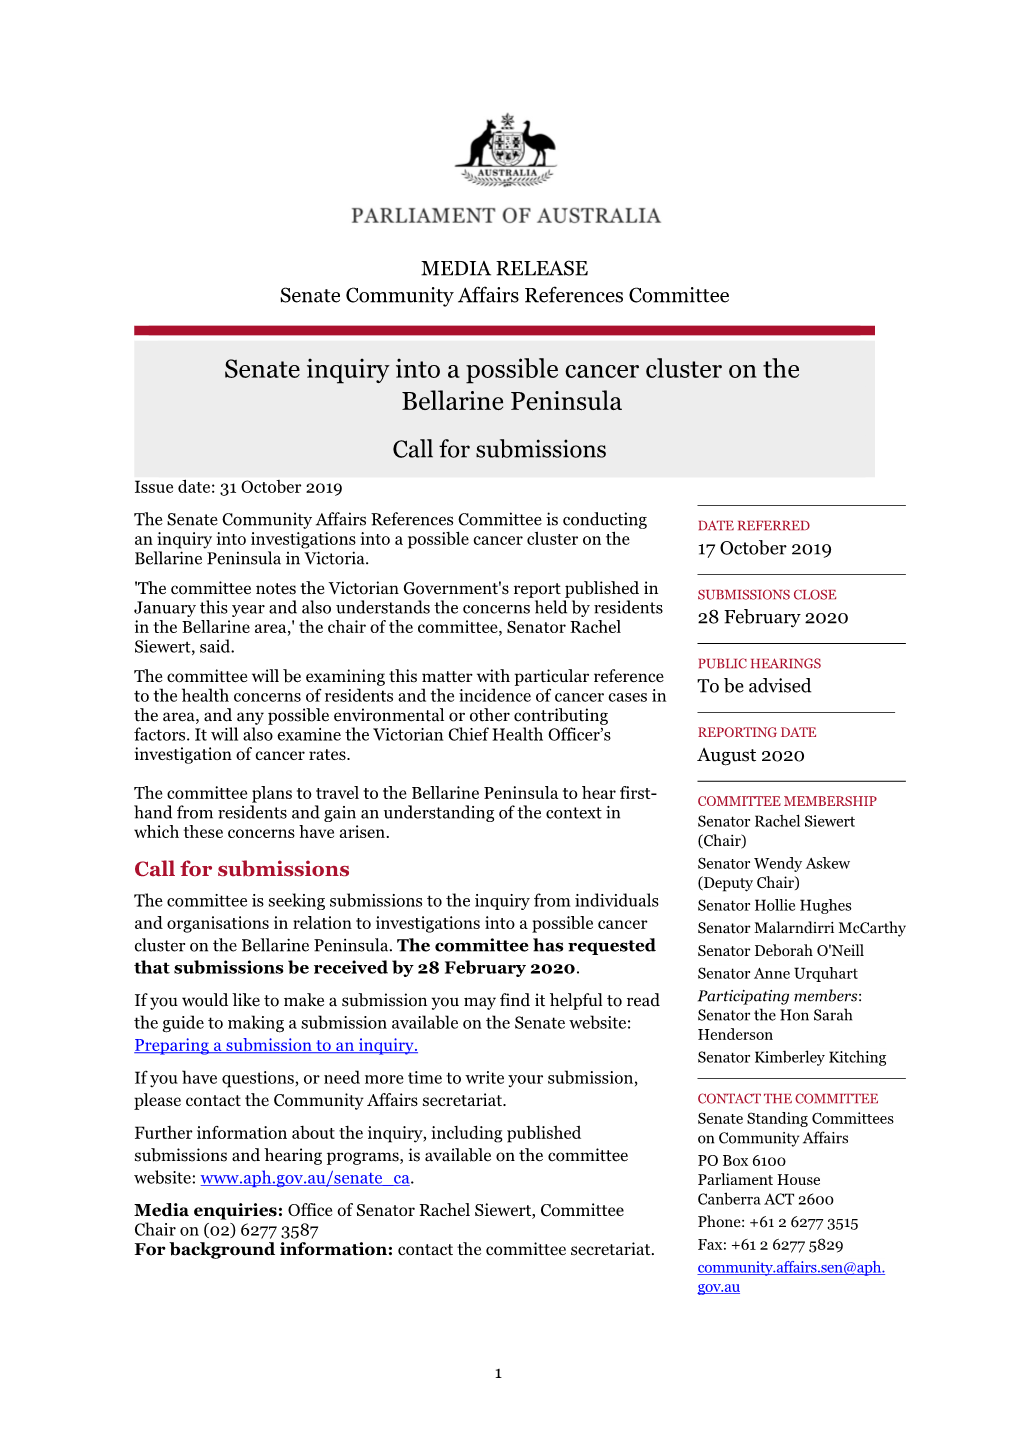 Senate Inquiry Into a Possible Cancer Cluster on the Bellarine Peninsula Call for Submissions Issue Date: 31 October 2019